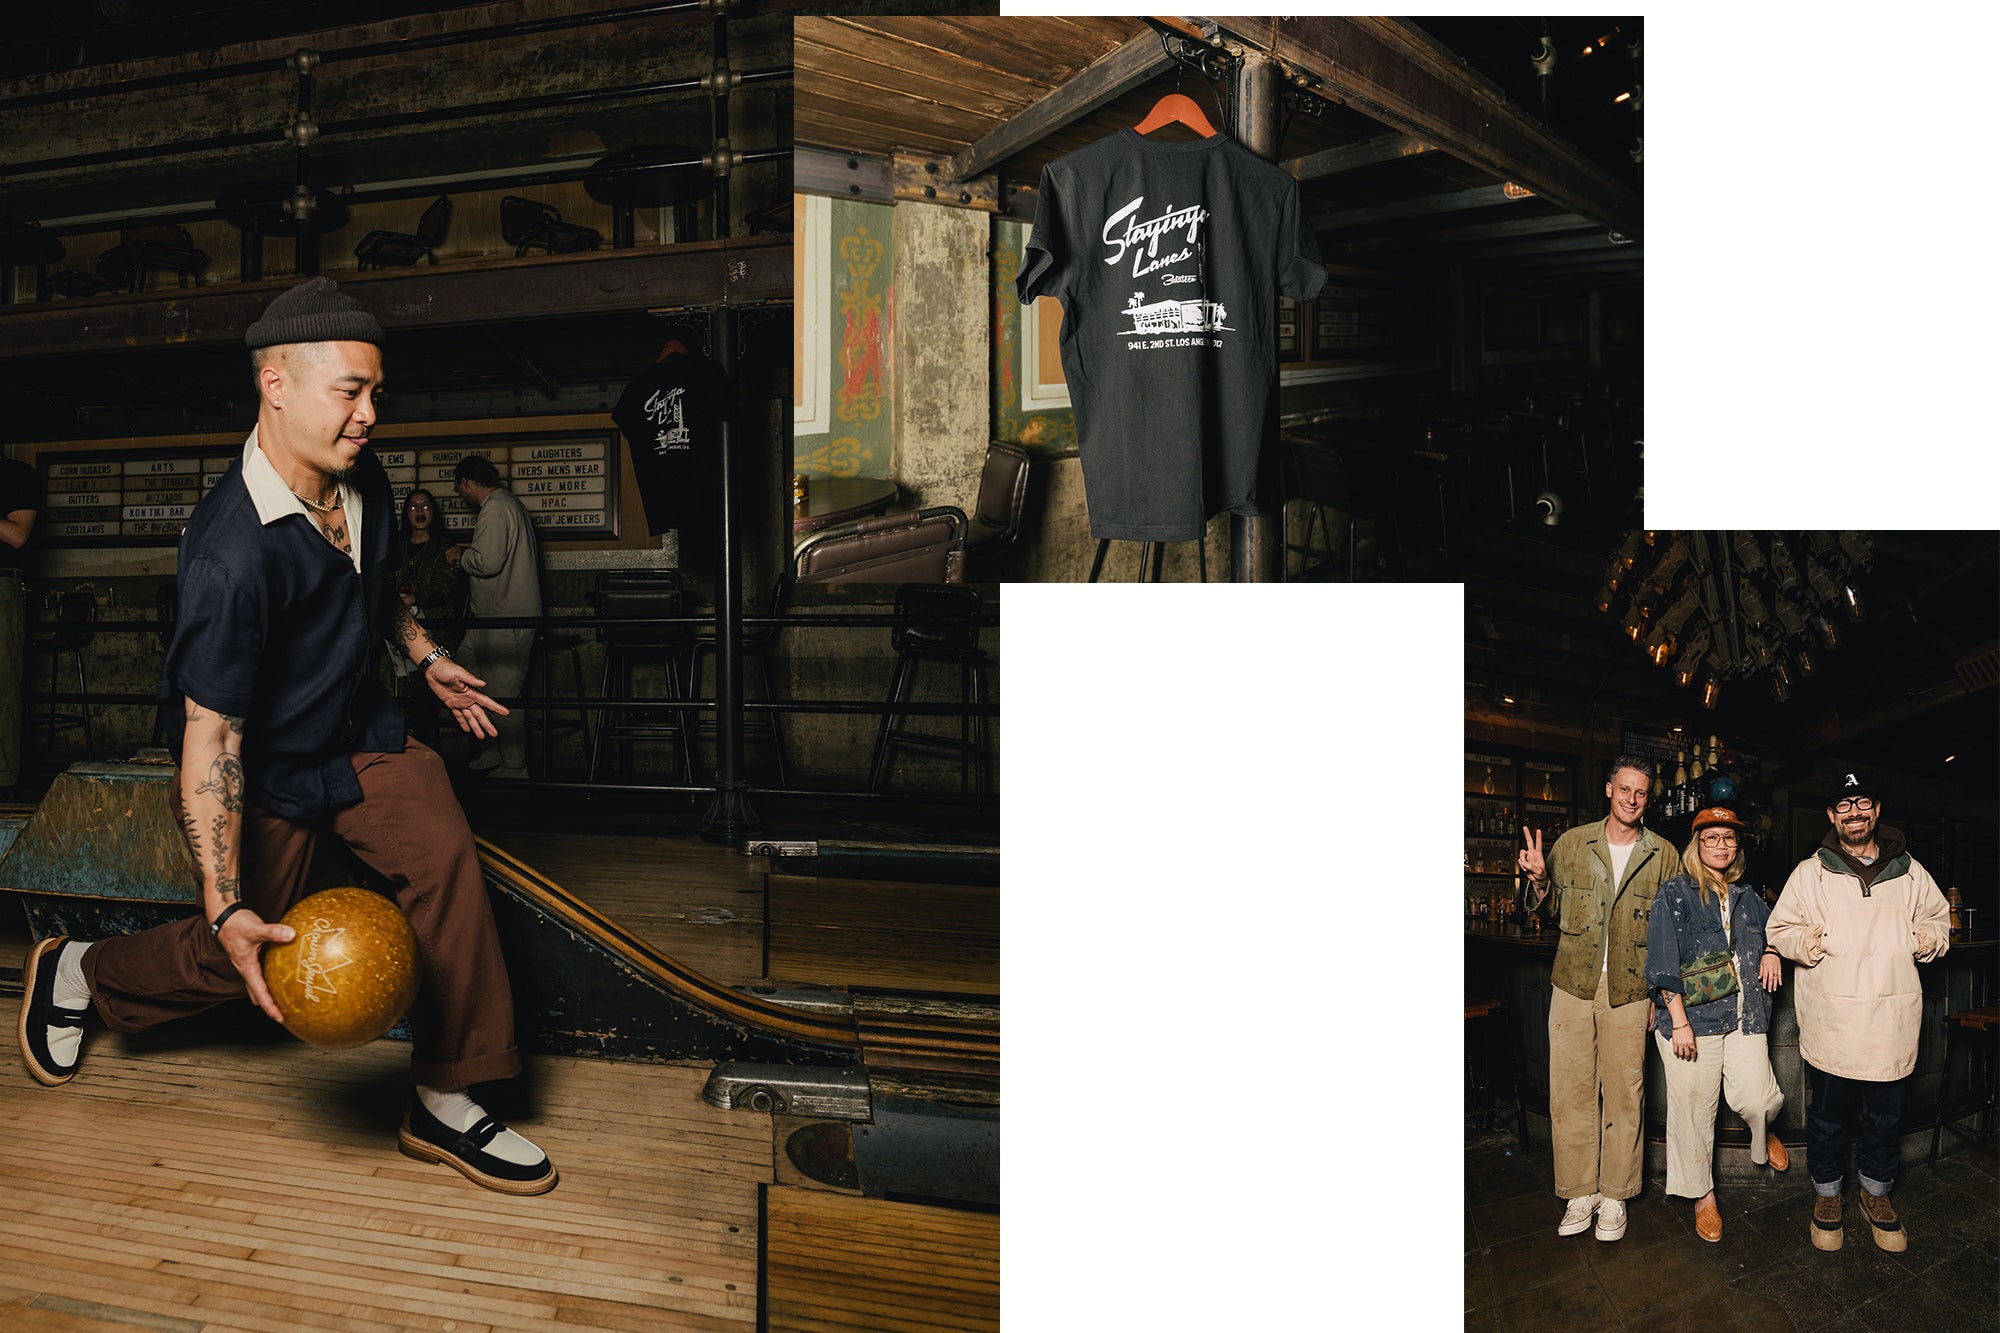 A triptych of a man bowling, a black tshirt, and a group of friends posing together for a photo.